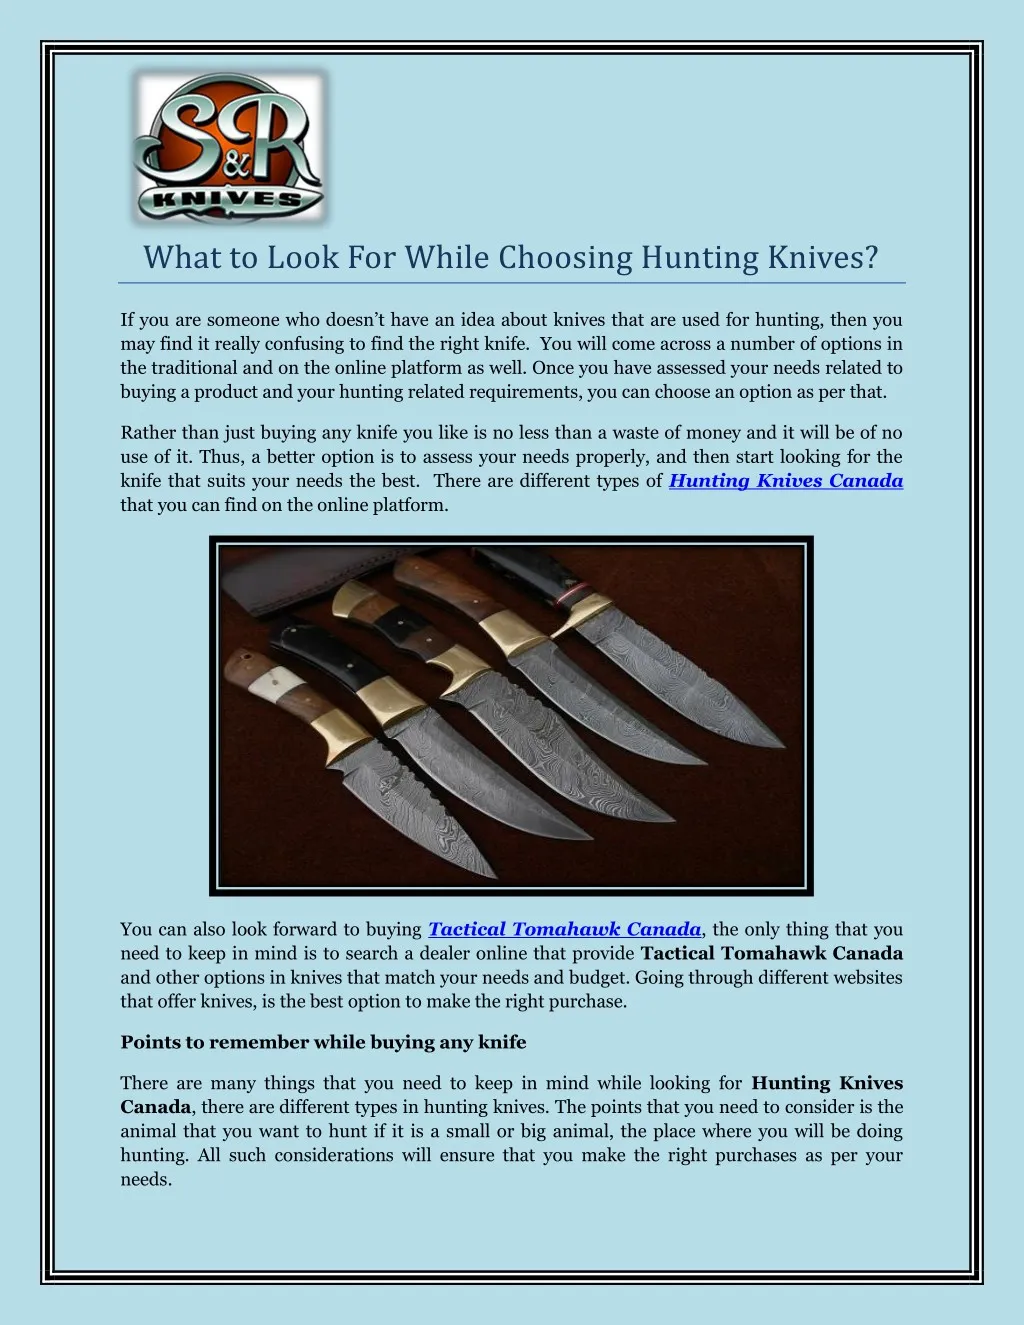 what to look for while choosing hunting knives